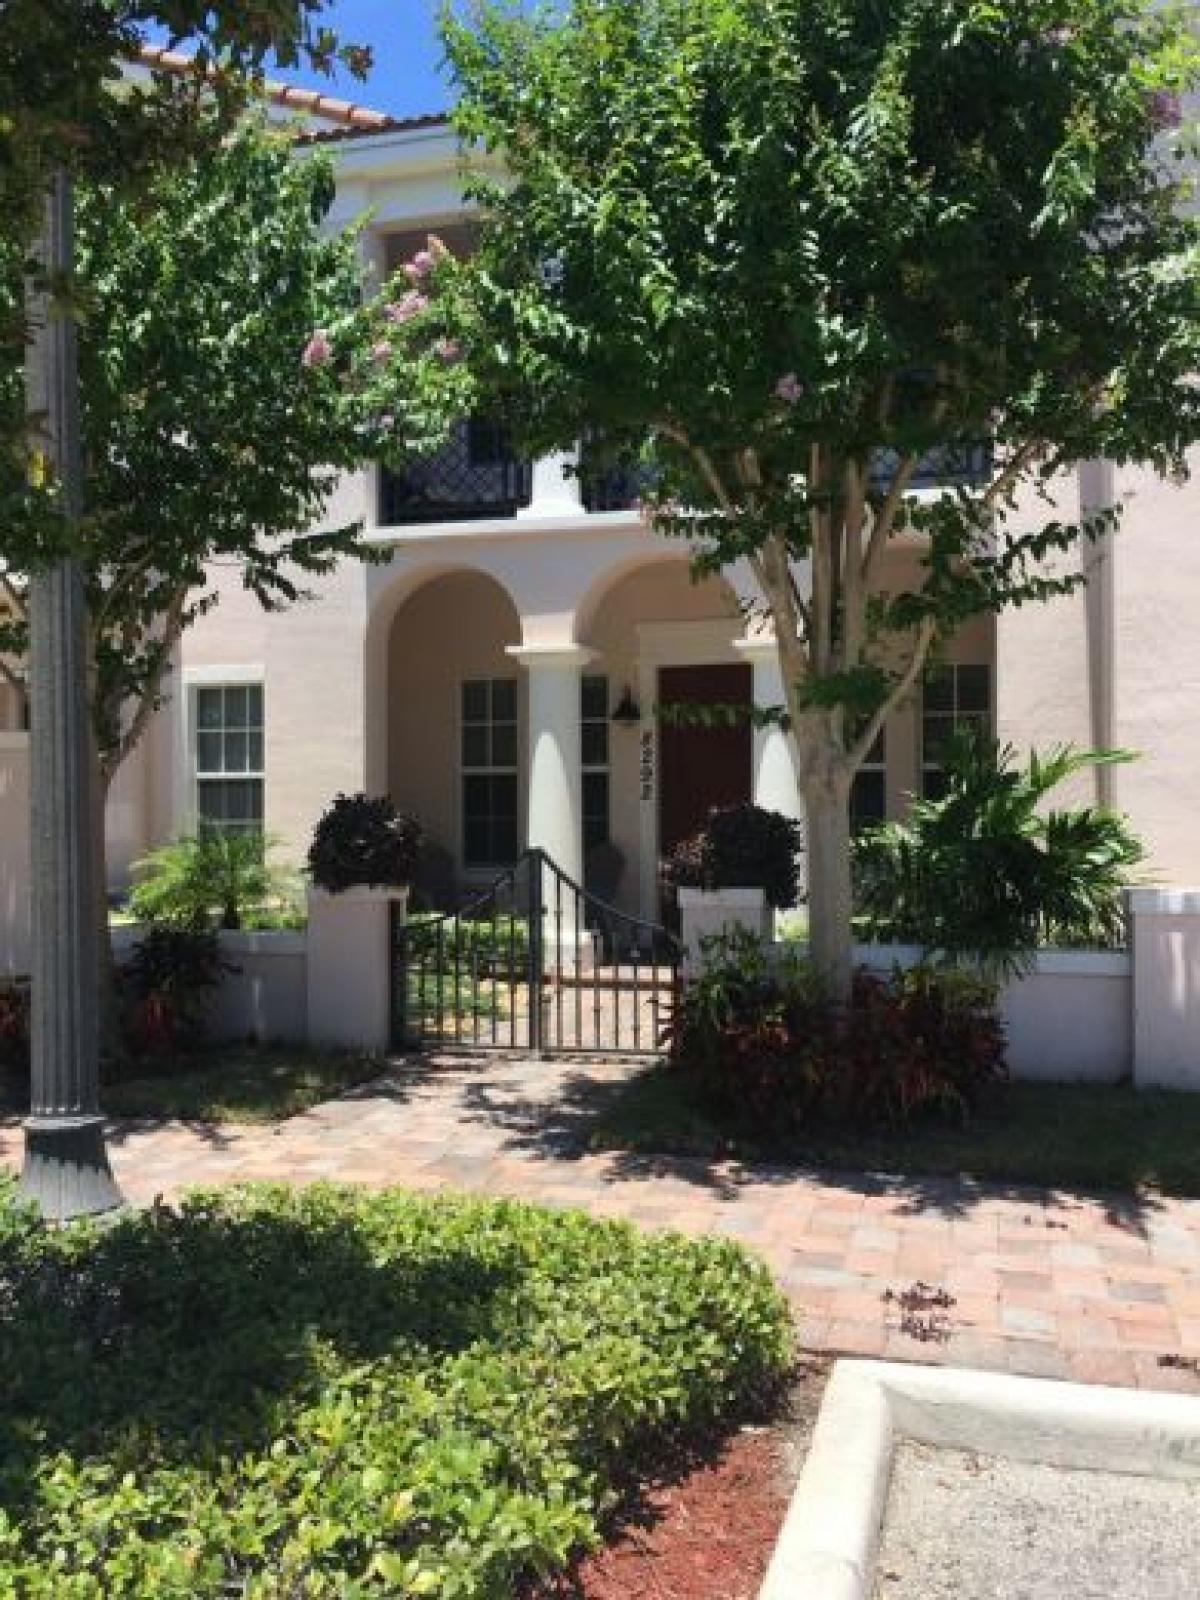 Picture of Townhome For Sale in Boca Raton, Florida, United States